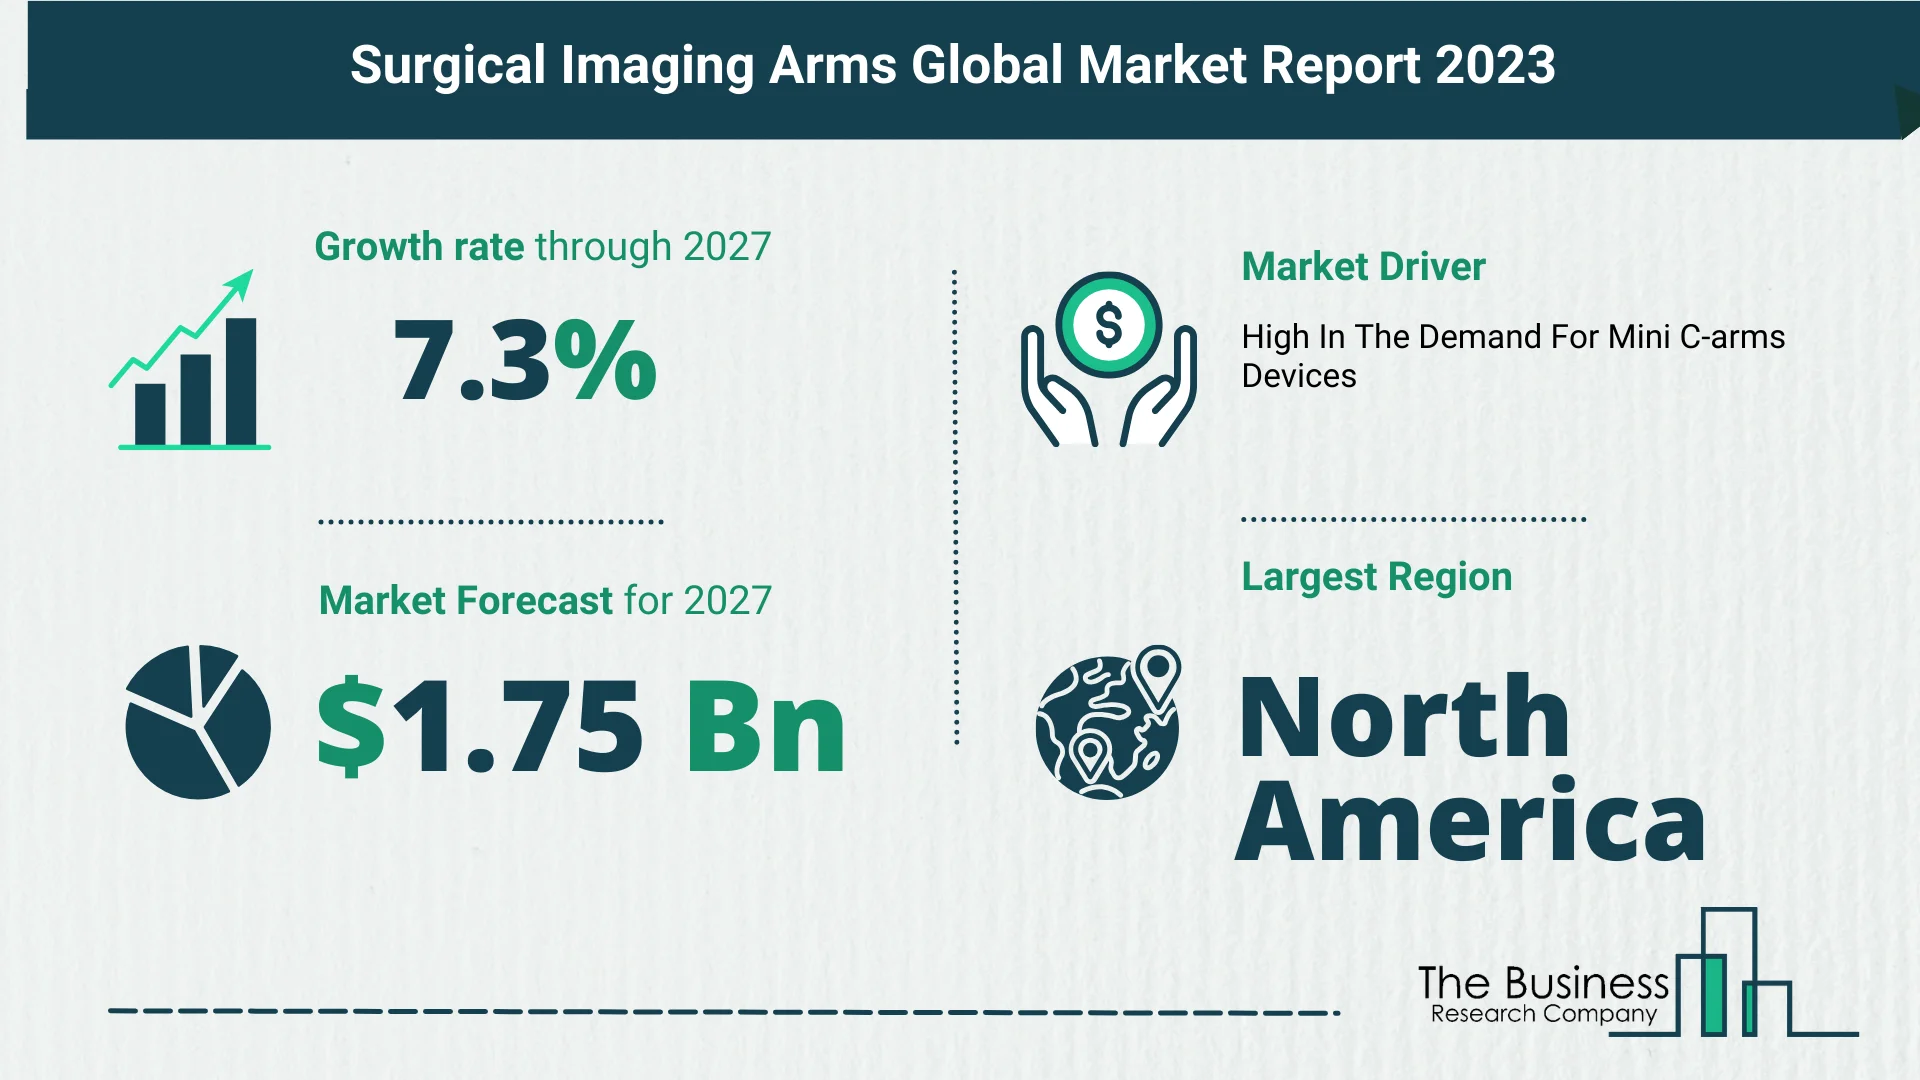 Global Surgical Imaging Arms Market